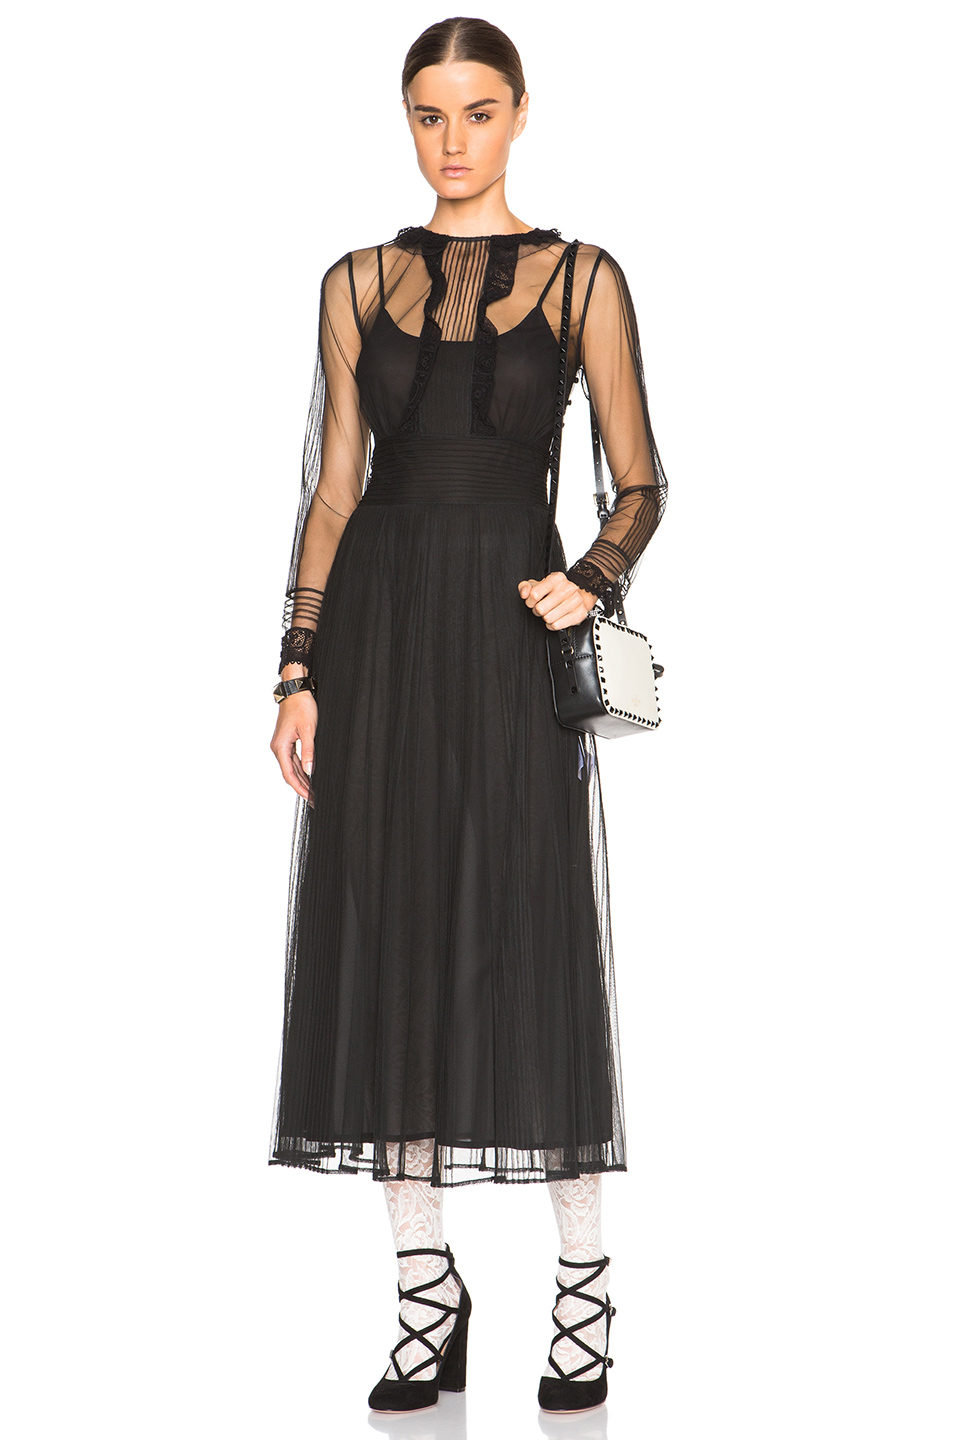 Lyst - Red Valentino Sheer Sleeve Maxi Dress in Black